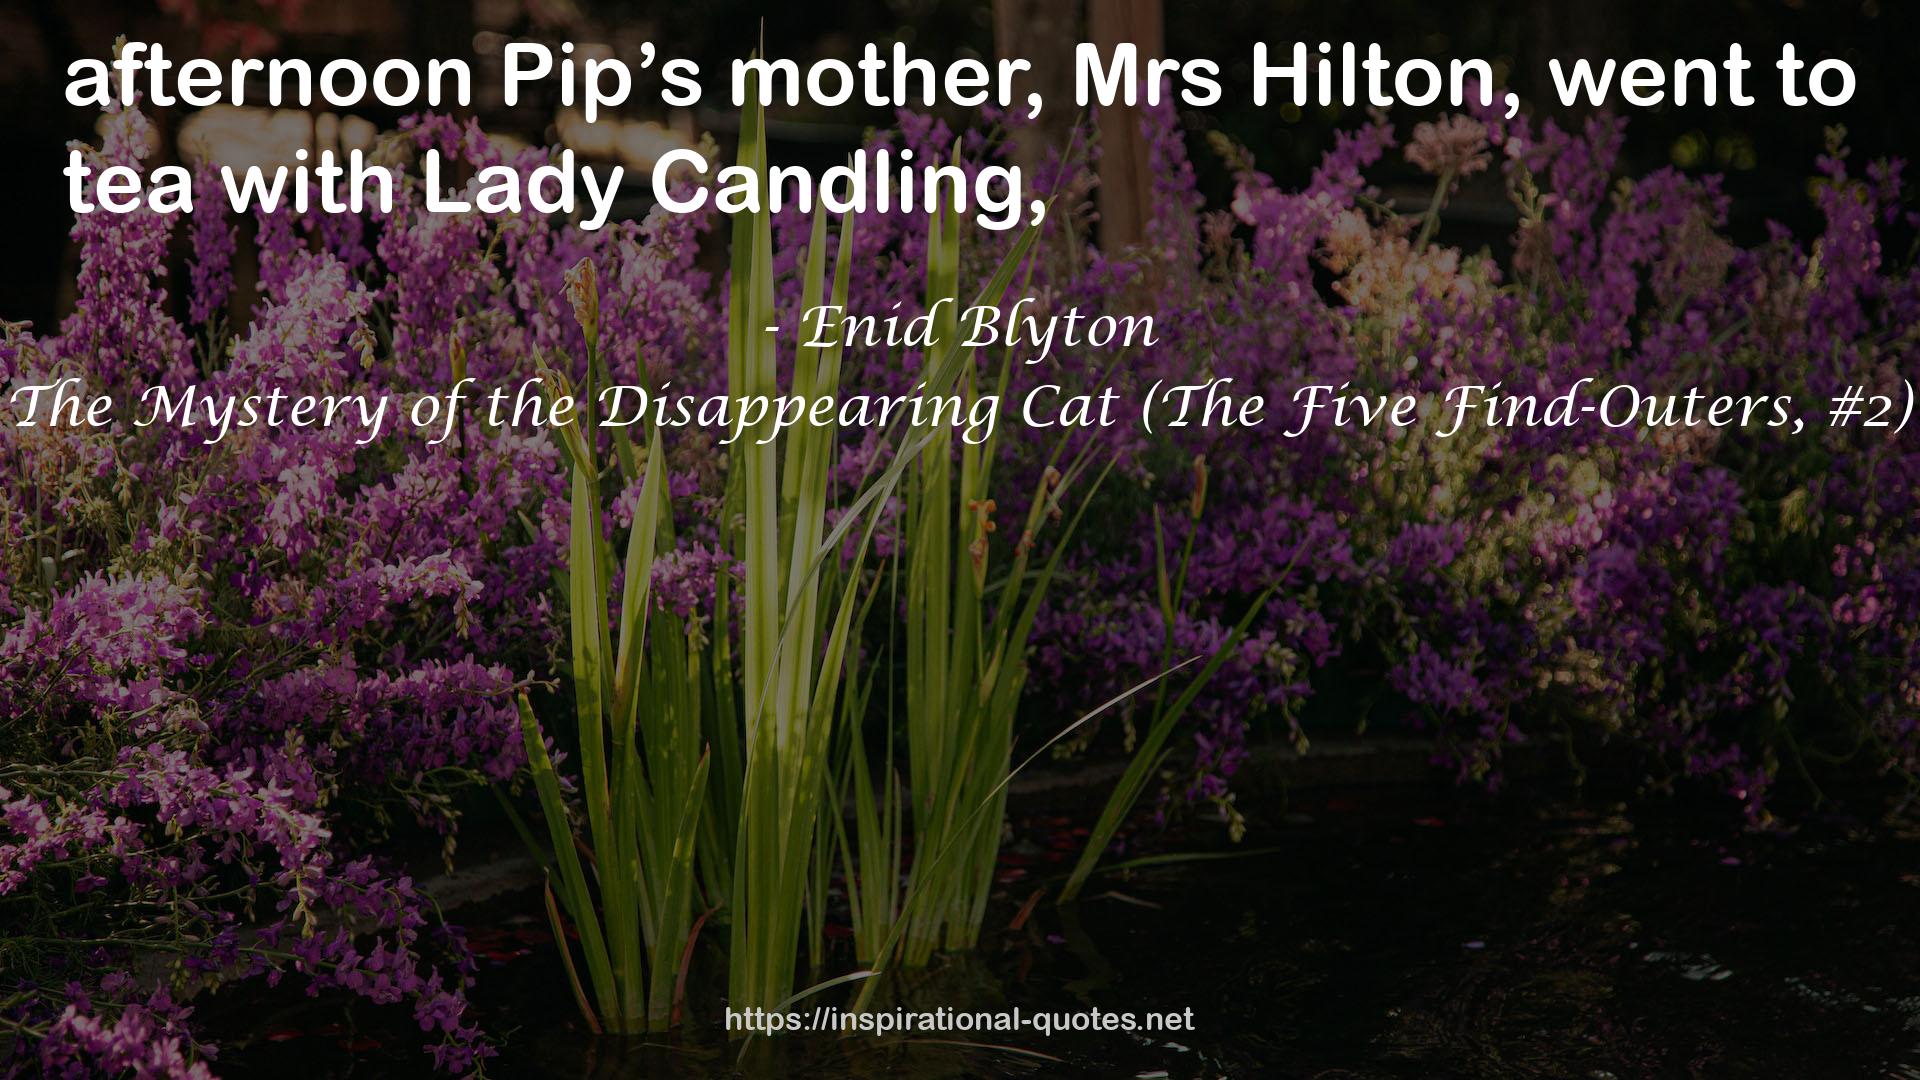 The Mystery of the Disappearing Cat (The Five Find-Outers, #2) QUOTES